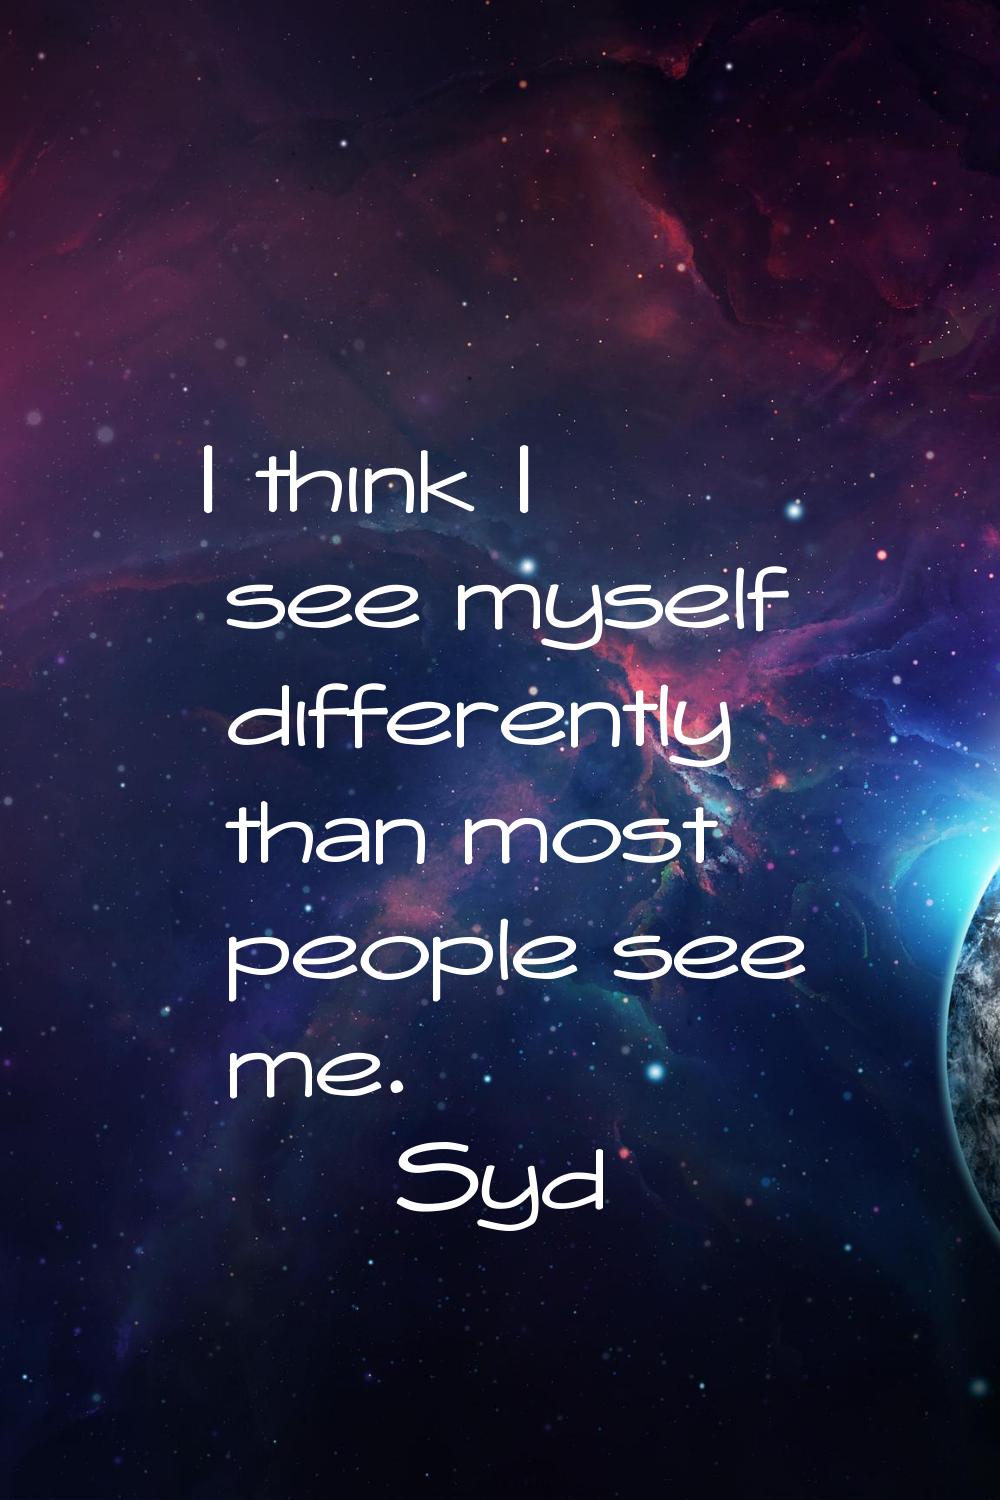 I think I see myself differently than most people see me.